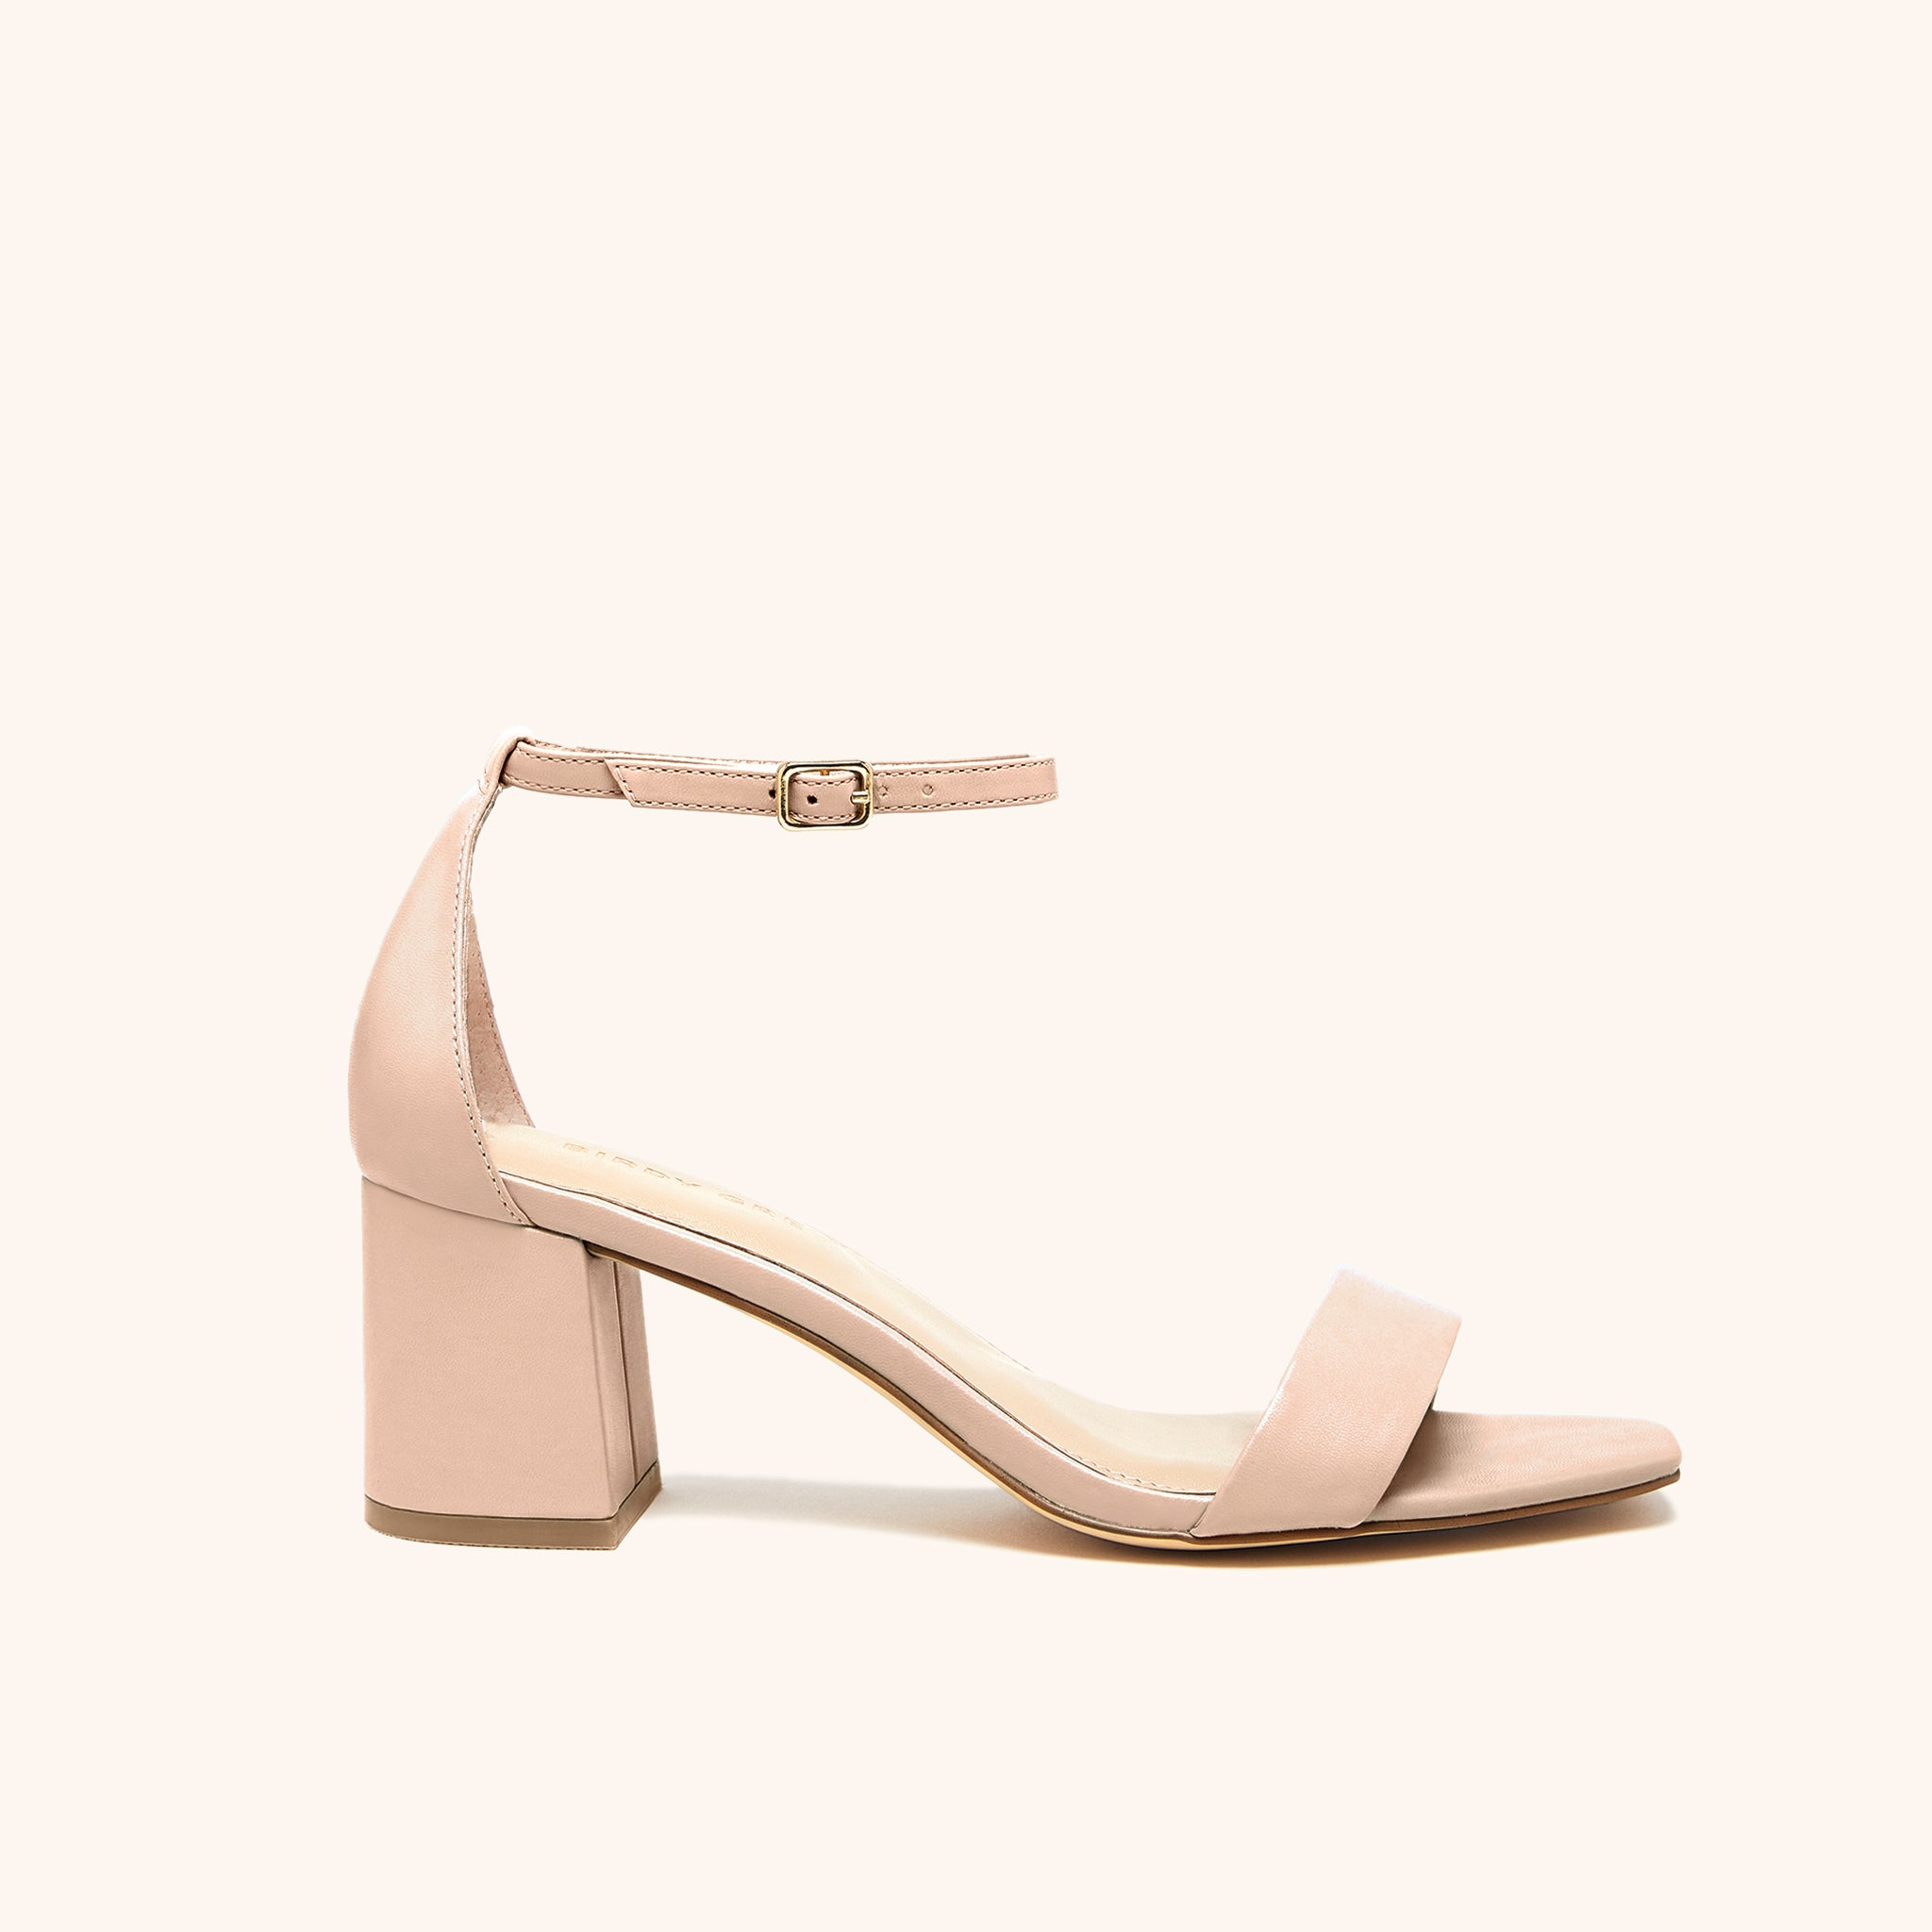 Side view of the Natalie Chunky Heel shoe in nude blush in vegan leather with open toe, enclosed heel, a two and one half inch block chunky heel, and adjustable buckle ankle strap. 